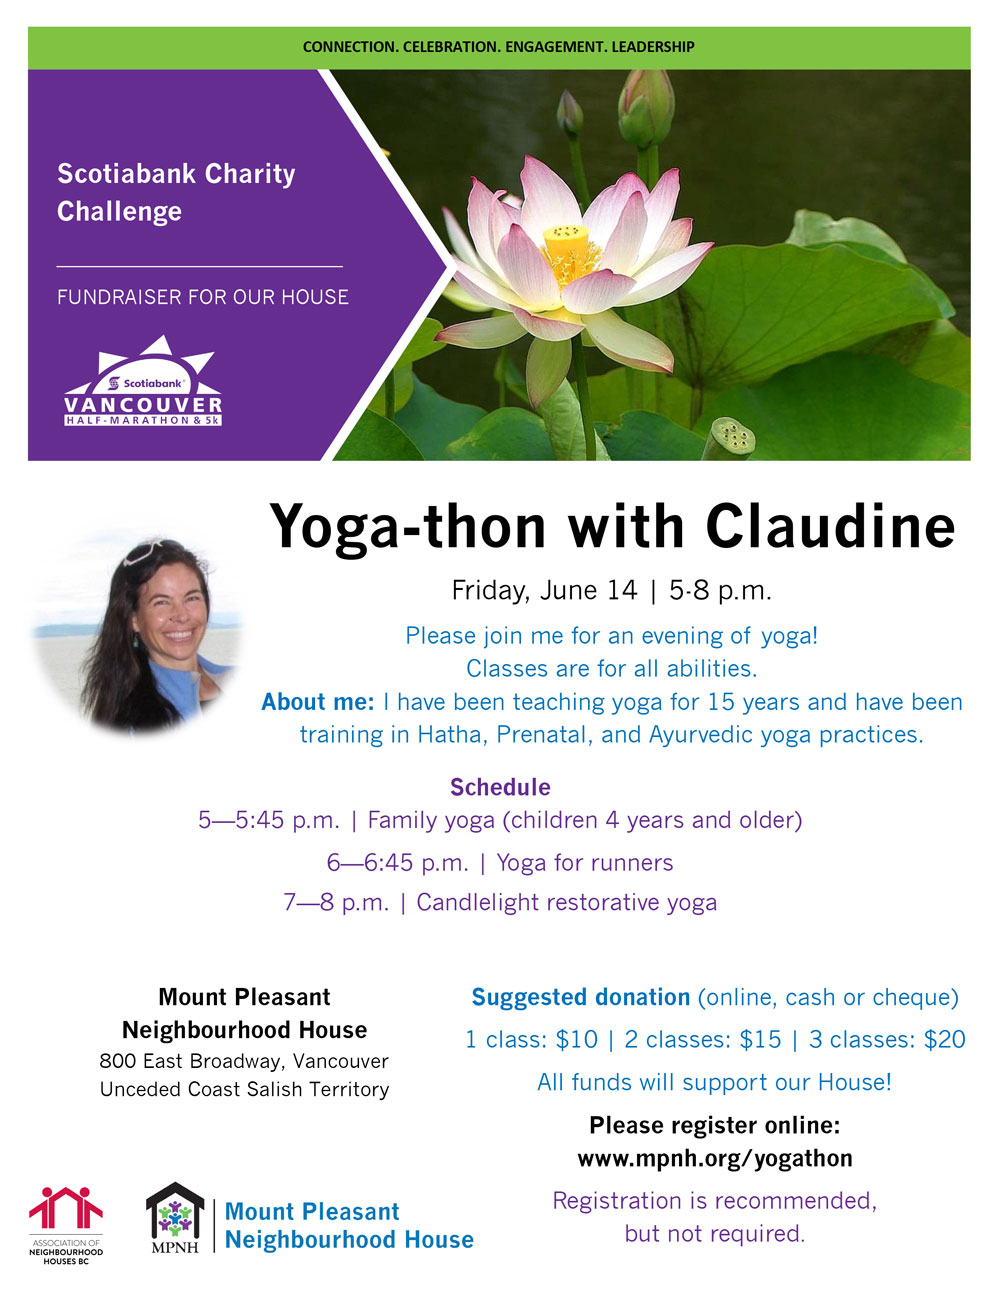 An image of the poster with event details, featuring a picture of a pink lotus surrounded by green leaves, as well as a photo of Claudine on the beach, smiling at the viewer.